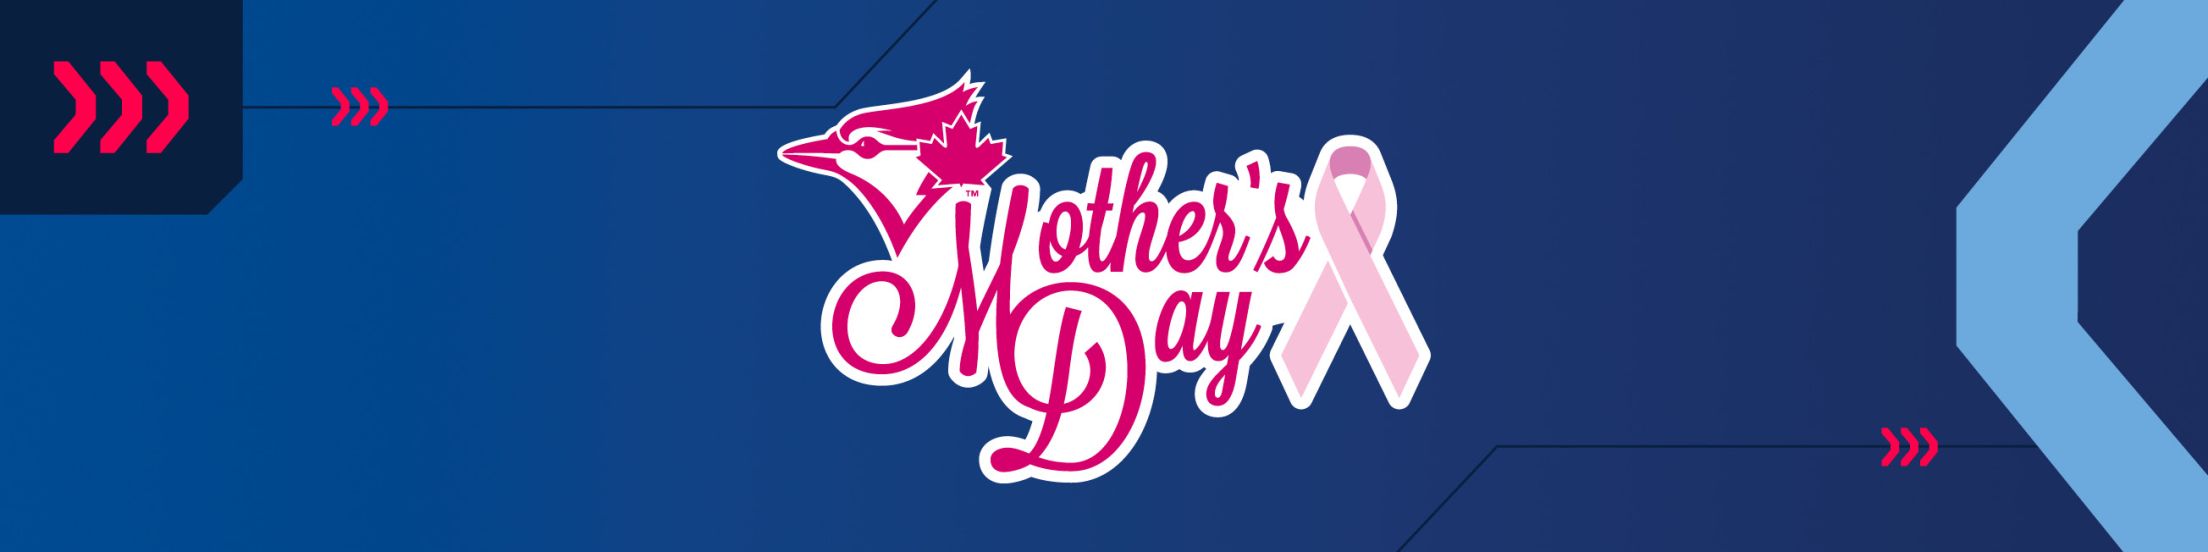 2015 MLB Mother's Day giveaways: A retrospective - Lookout Landing